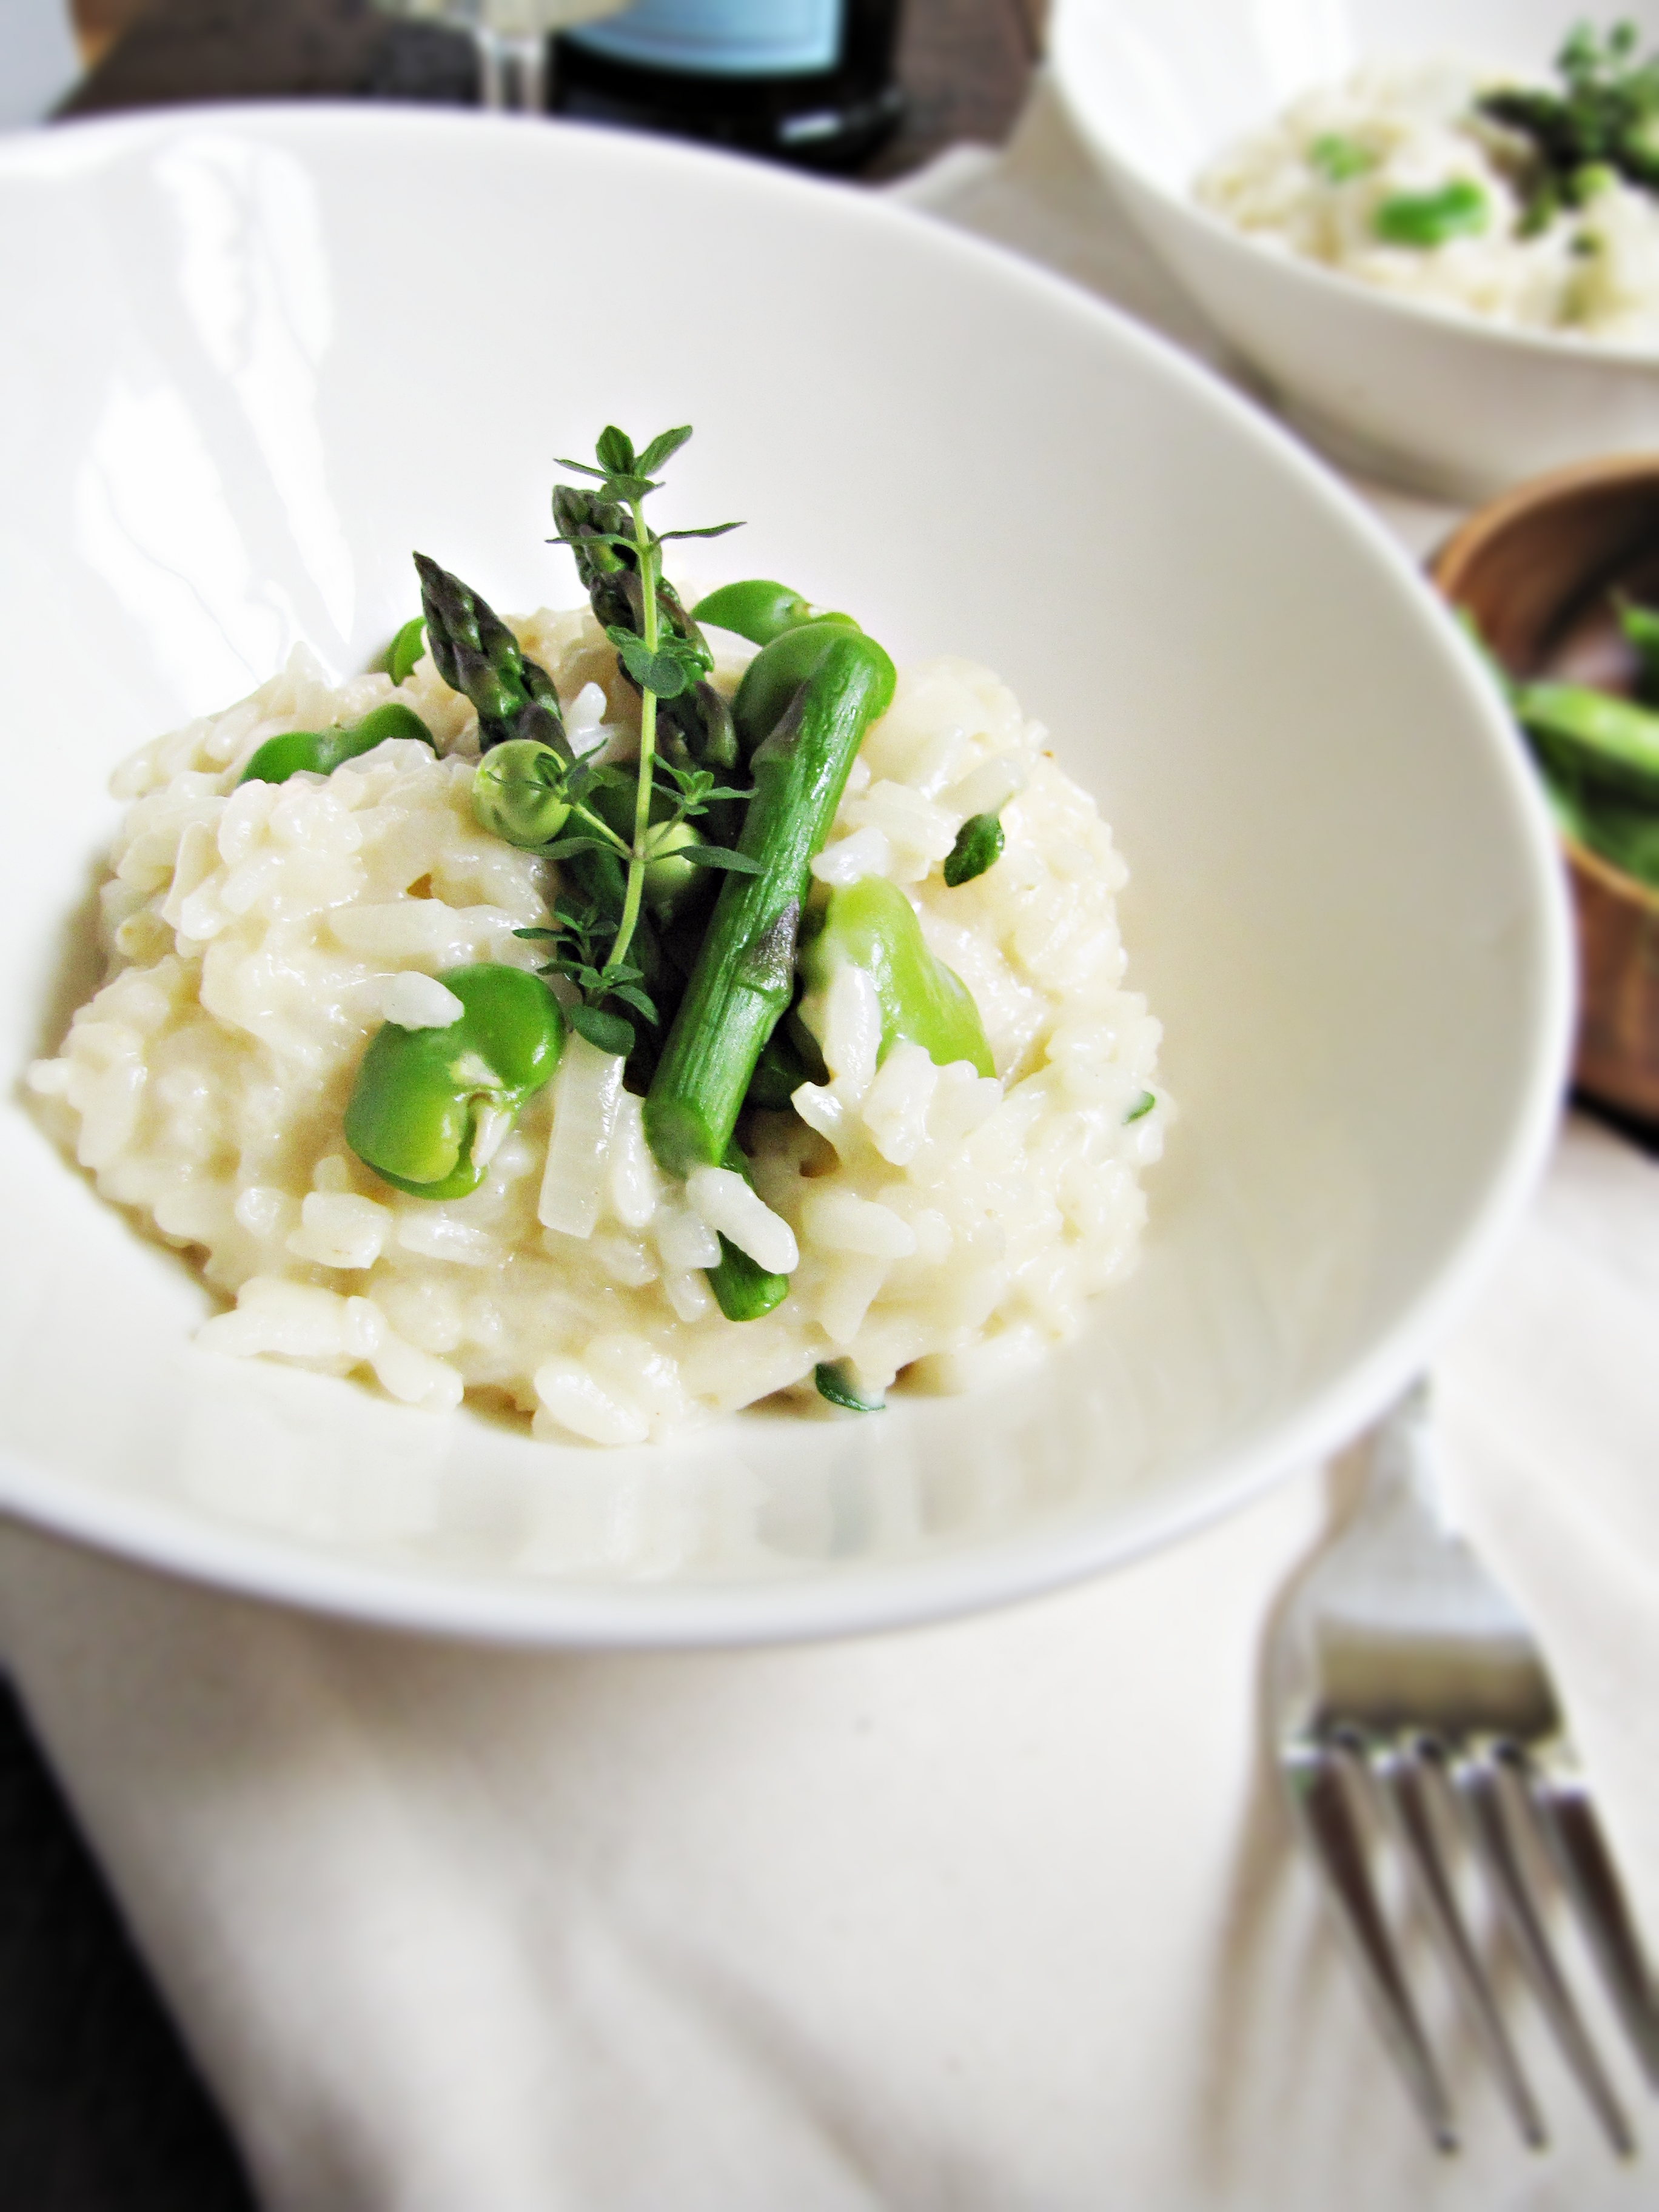 13 Recipes for Spring - Pea, Fava, and Asparagus Risotto {Katie at the Kitchen Door}